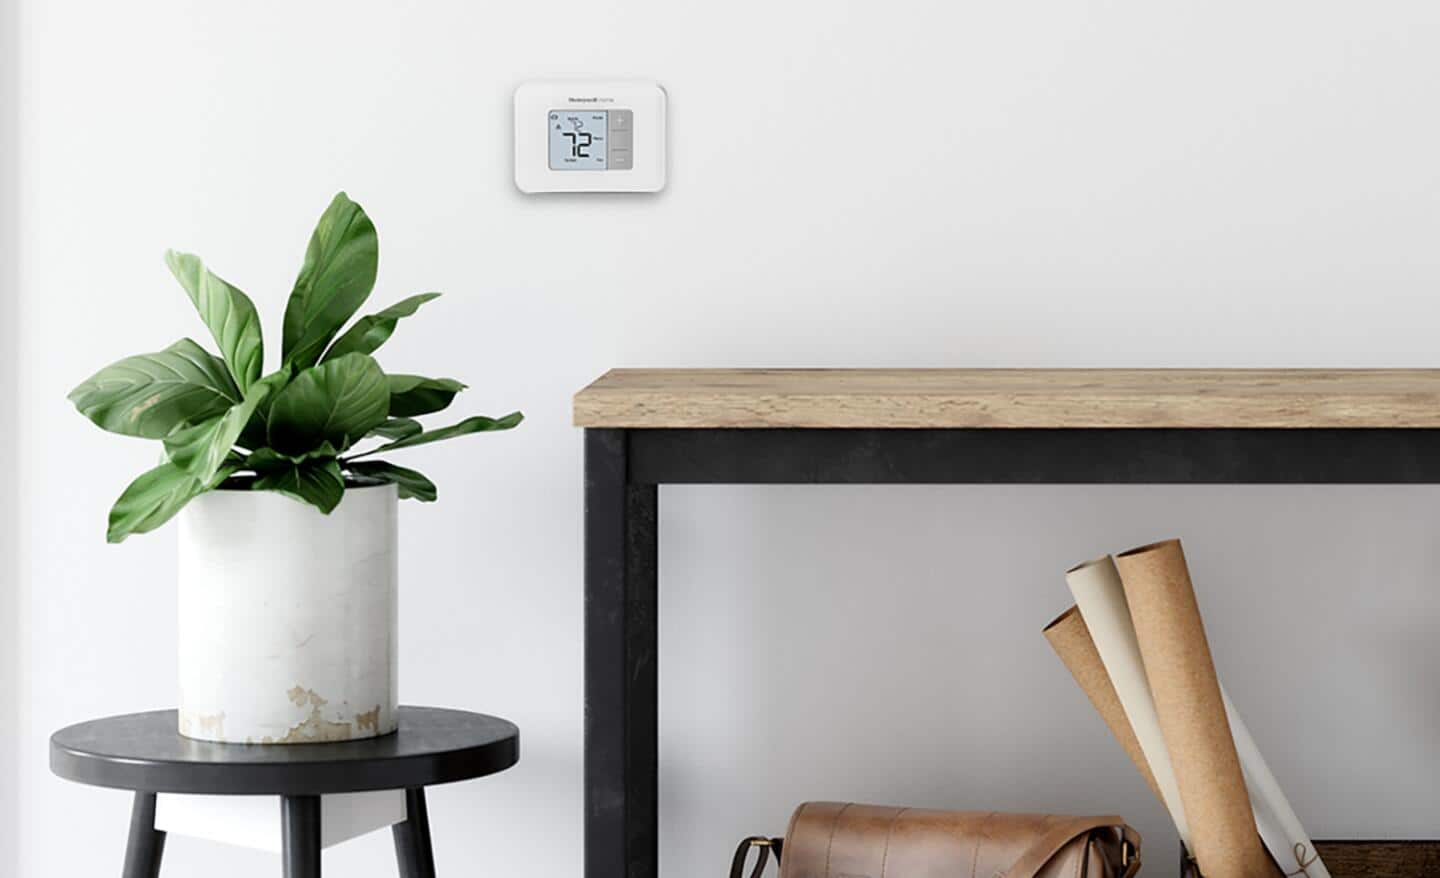 A manual thermostat on a white wall with a plant and a table in the foreground. 